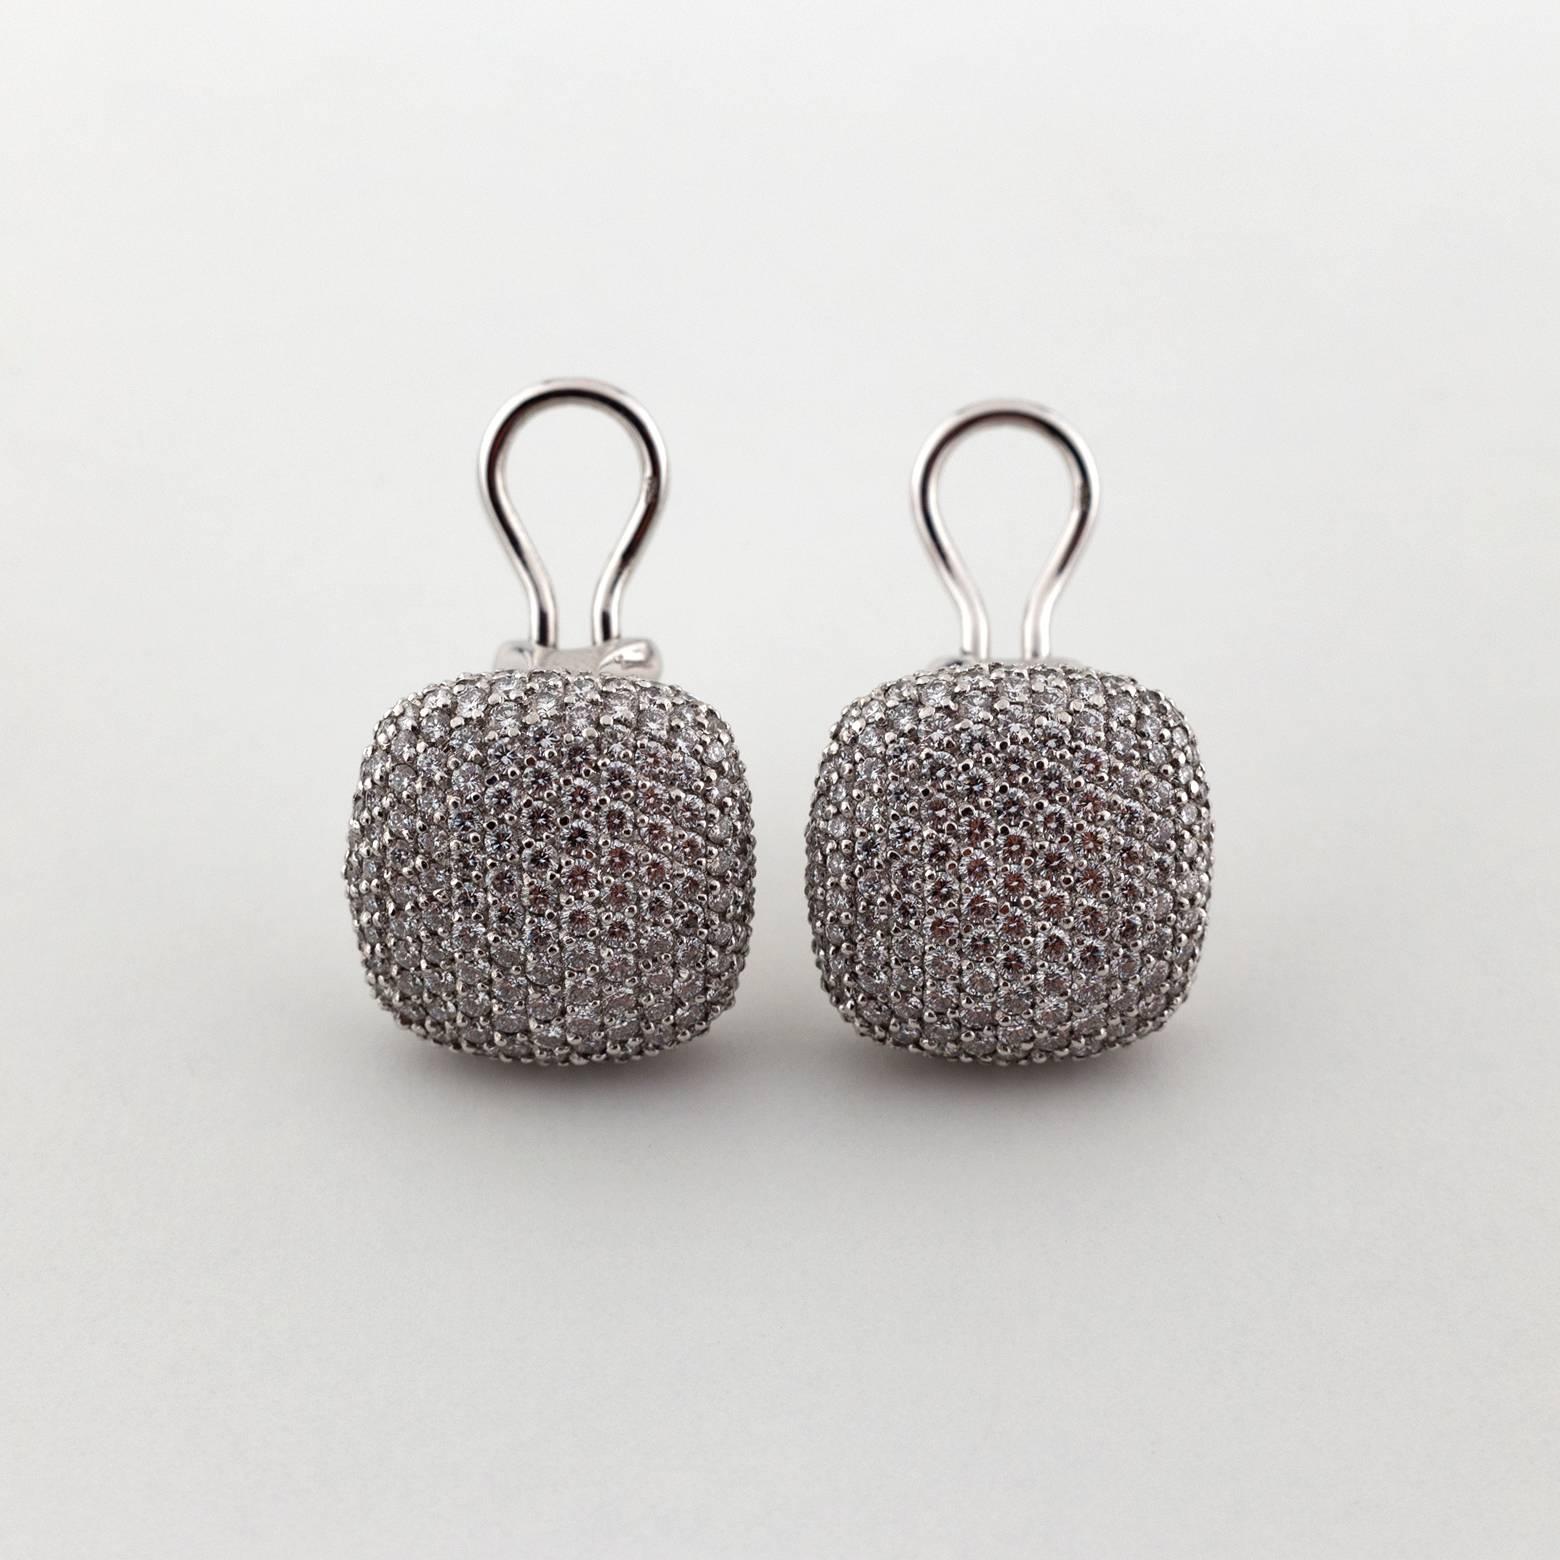 These stud earrings shine from across the room dazzling with 3.58 tw diamonds! They are stunning and elegant and absolutely amazing!!! A must have!!! You'll want to create events just so you can wear these on a regular basis! Made in Germany by